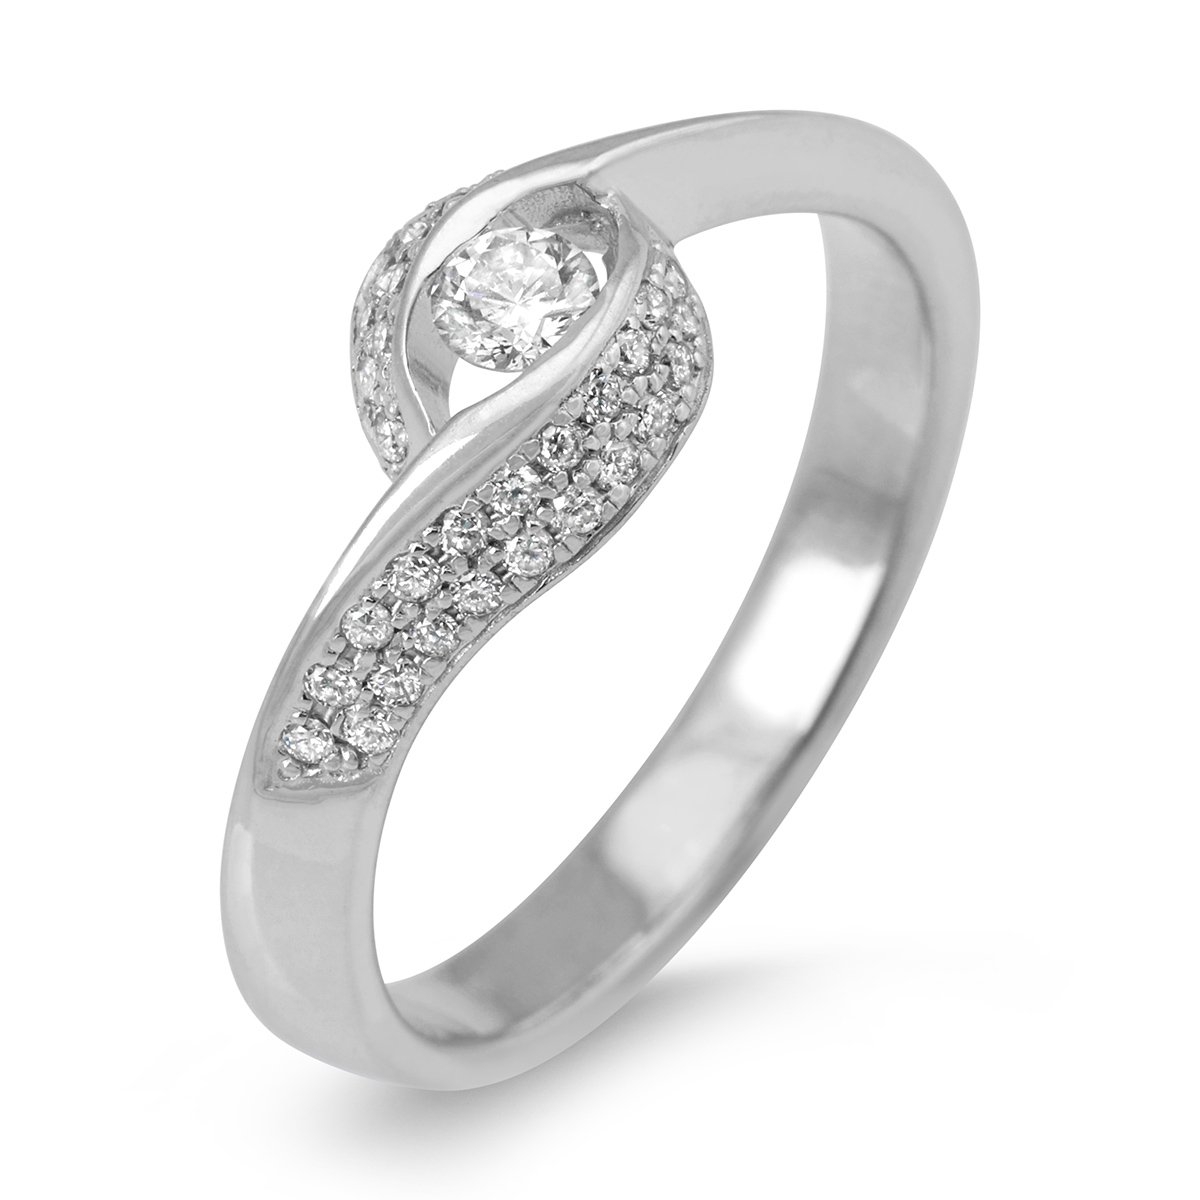 Anbinder Jewelry 14K White Gold Women's Knot Ring with Diamonds - 1